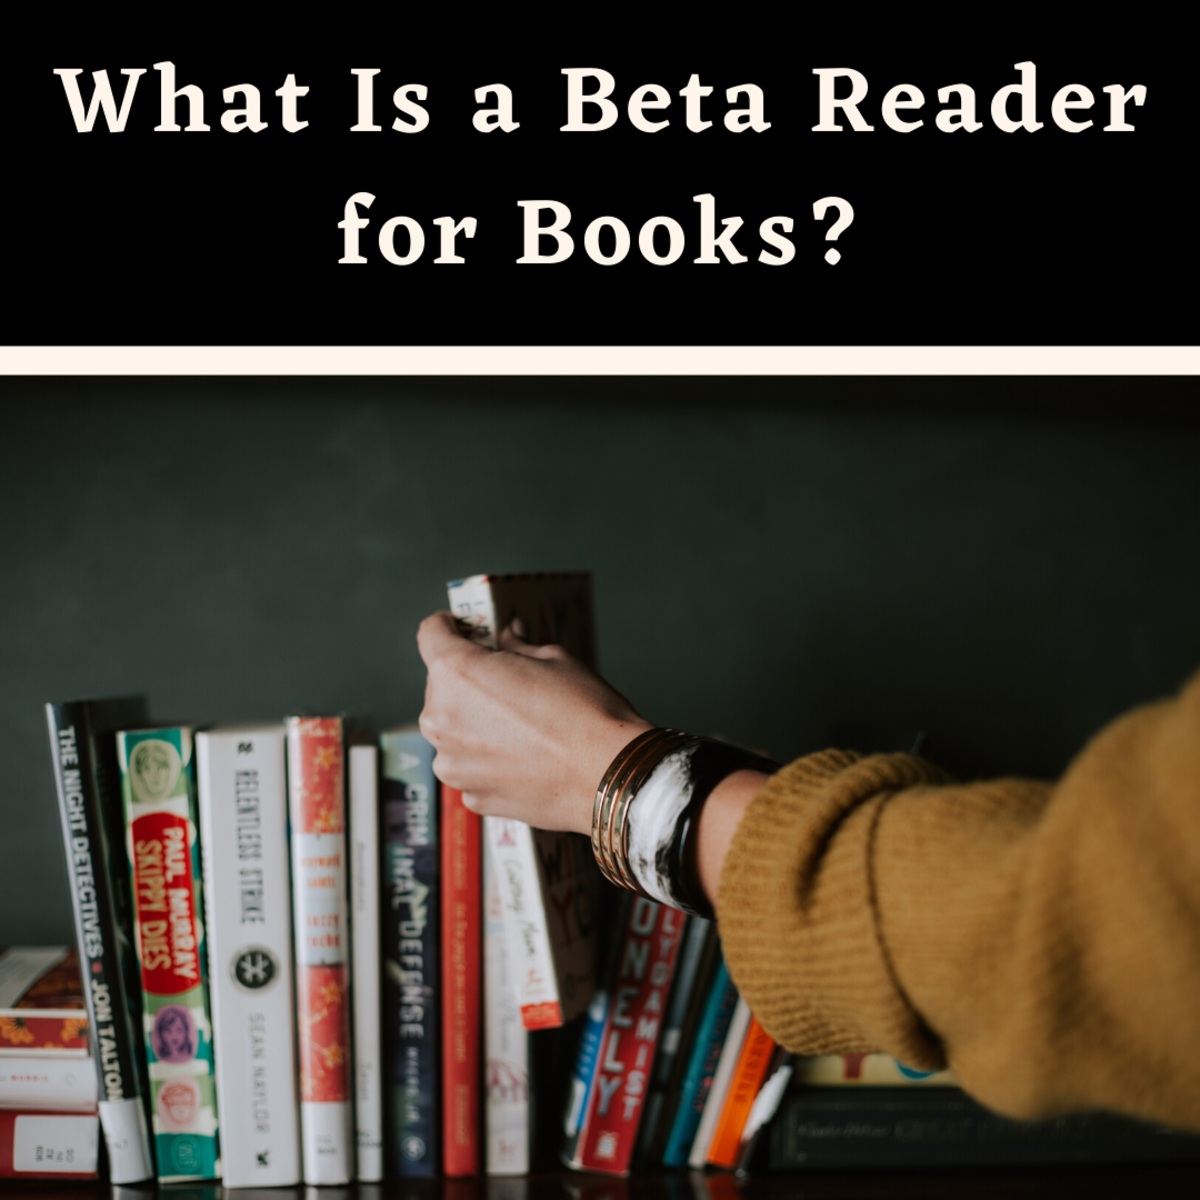 Beta readers are an important part of publishing. Read on to learn more about them.